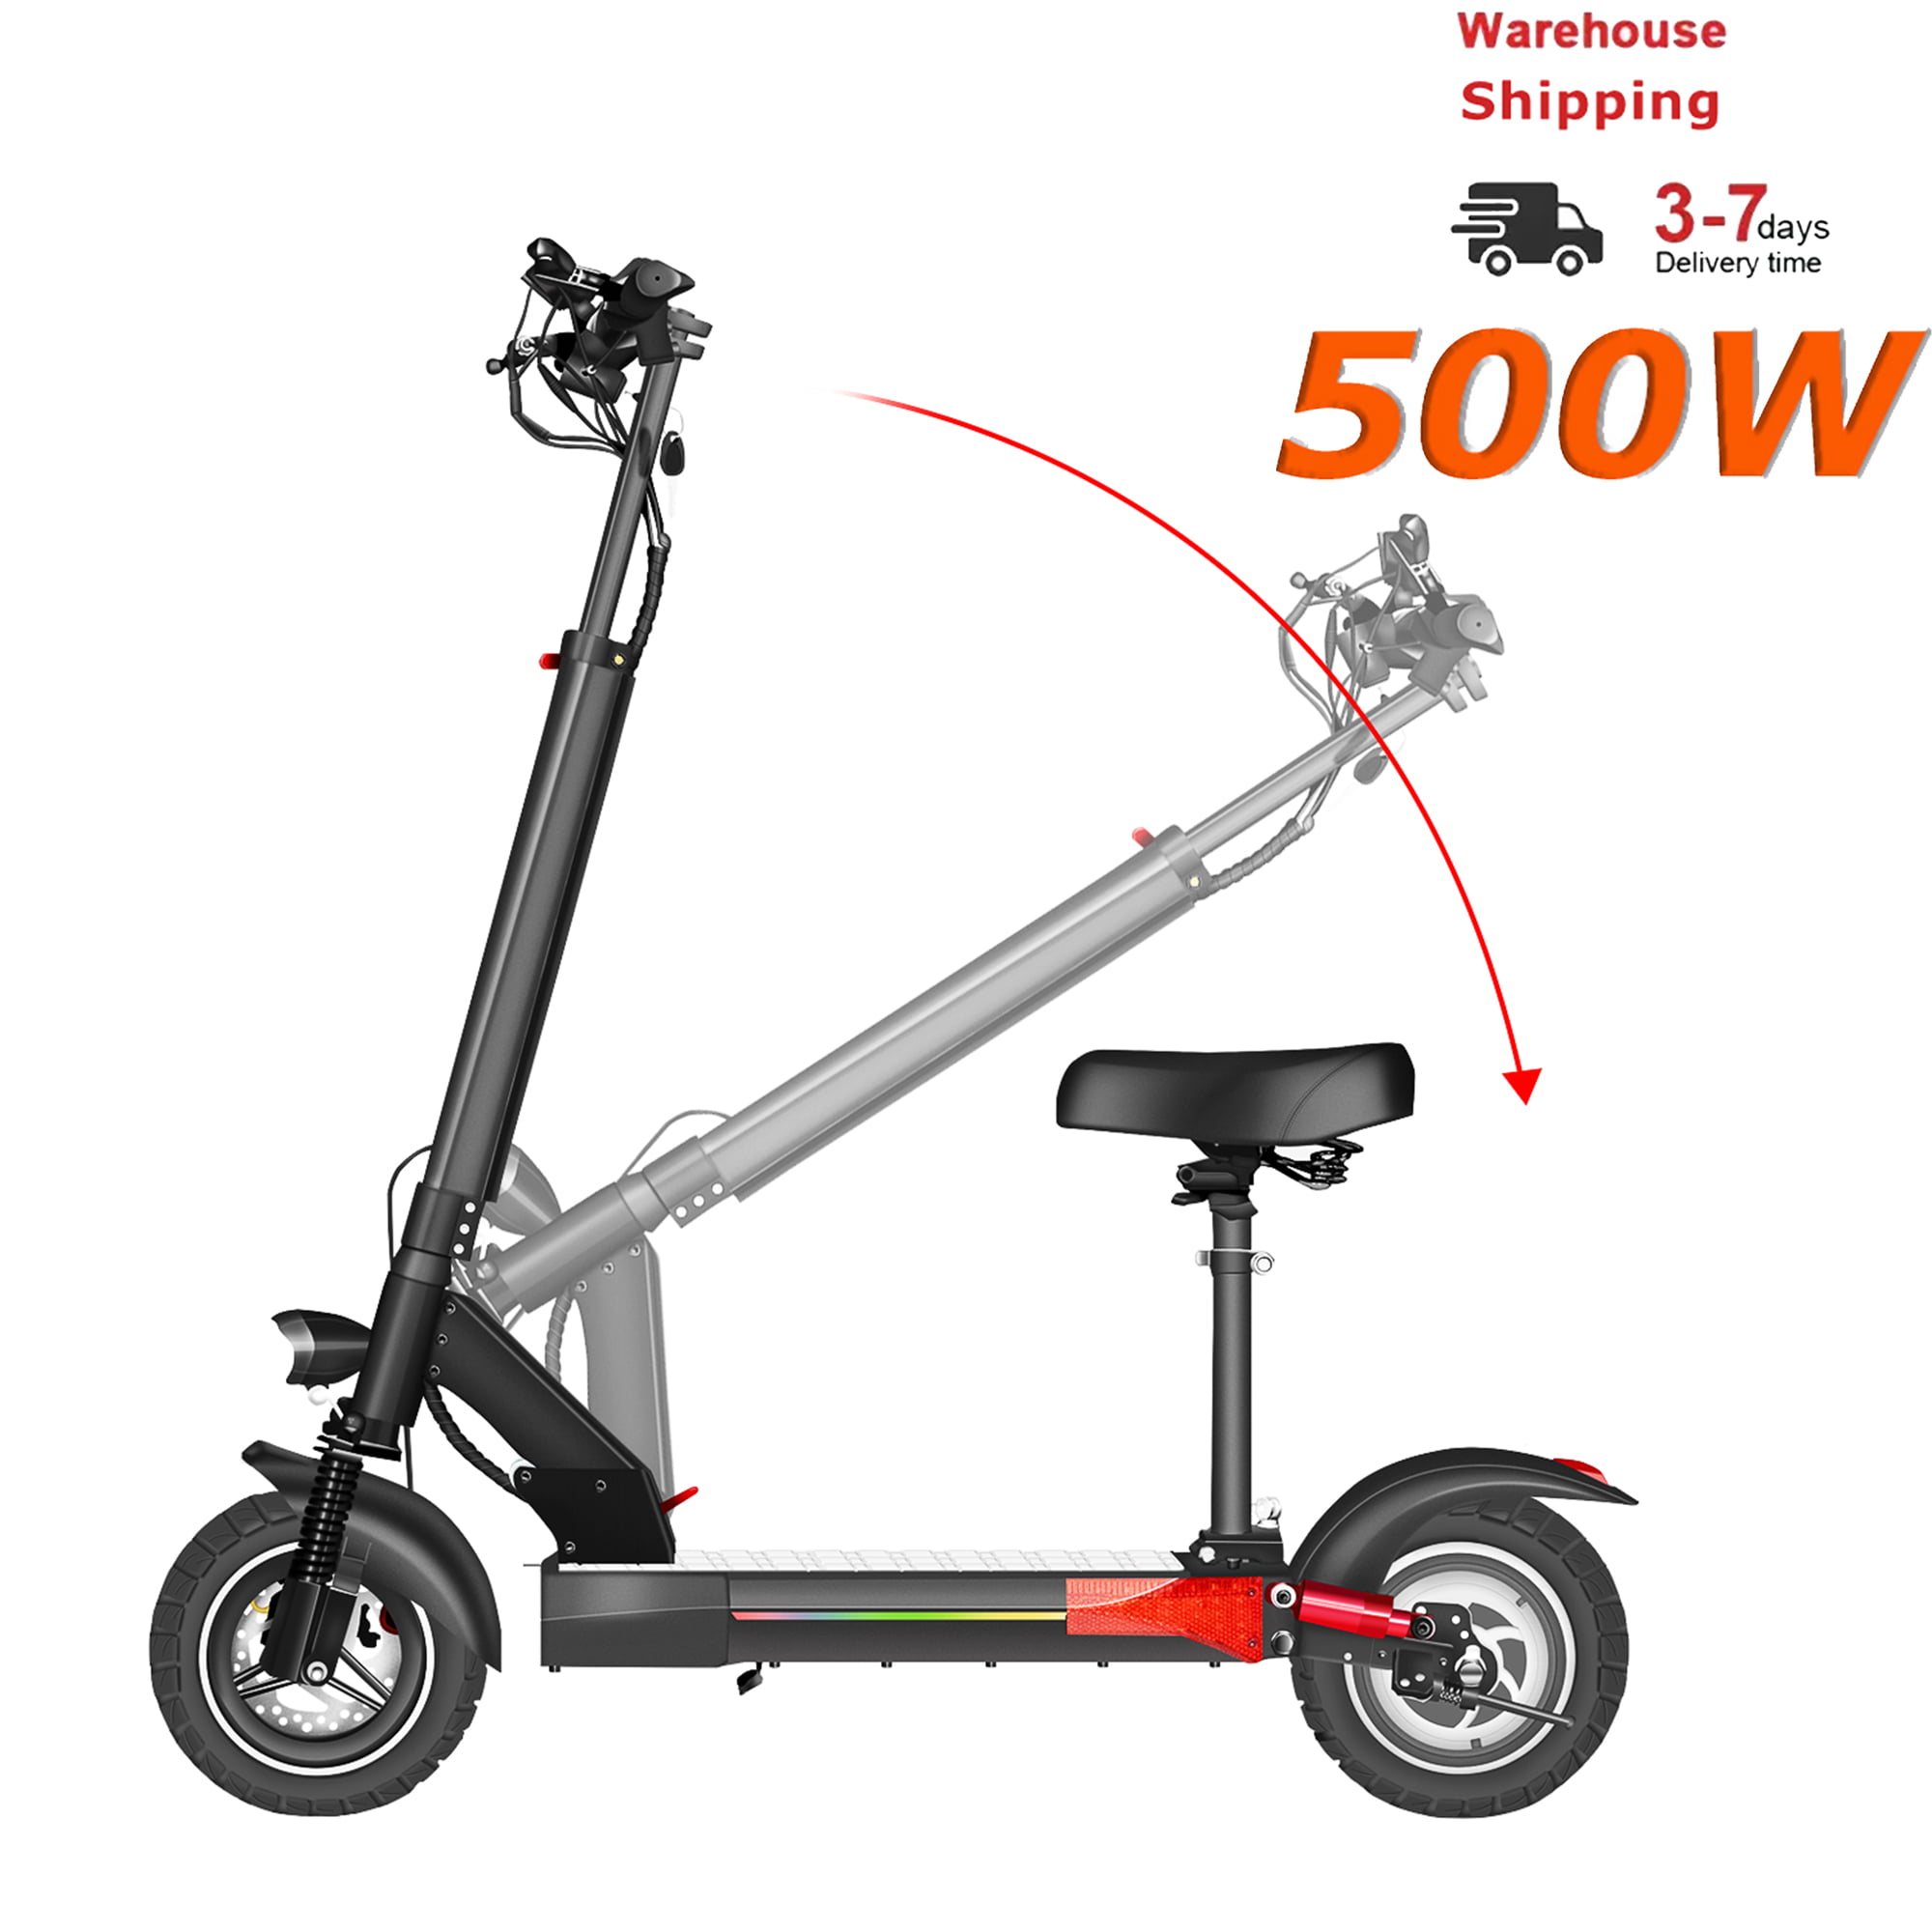 Segmart Adults Electric Scooter, 500W Motor Folding Motorized Lightweight Compact E-Scooters with APPS, Up to 28MPH & 37 Miles-10'' Solid Tires, Dual Braking System, 330lbs, Black - Walmart.com